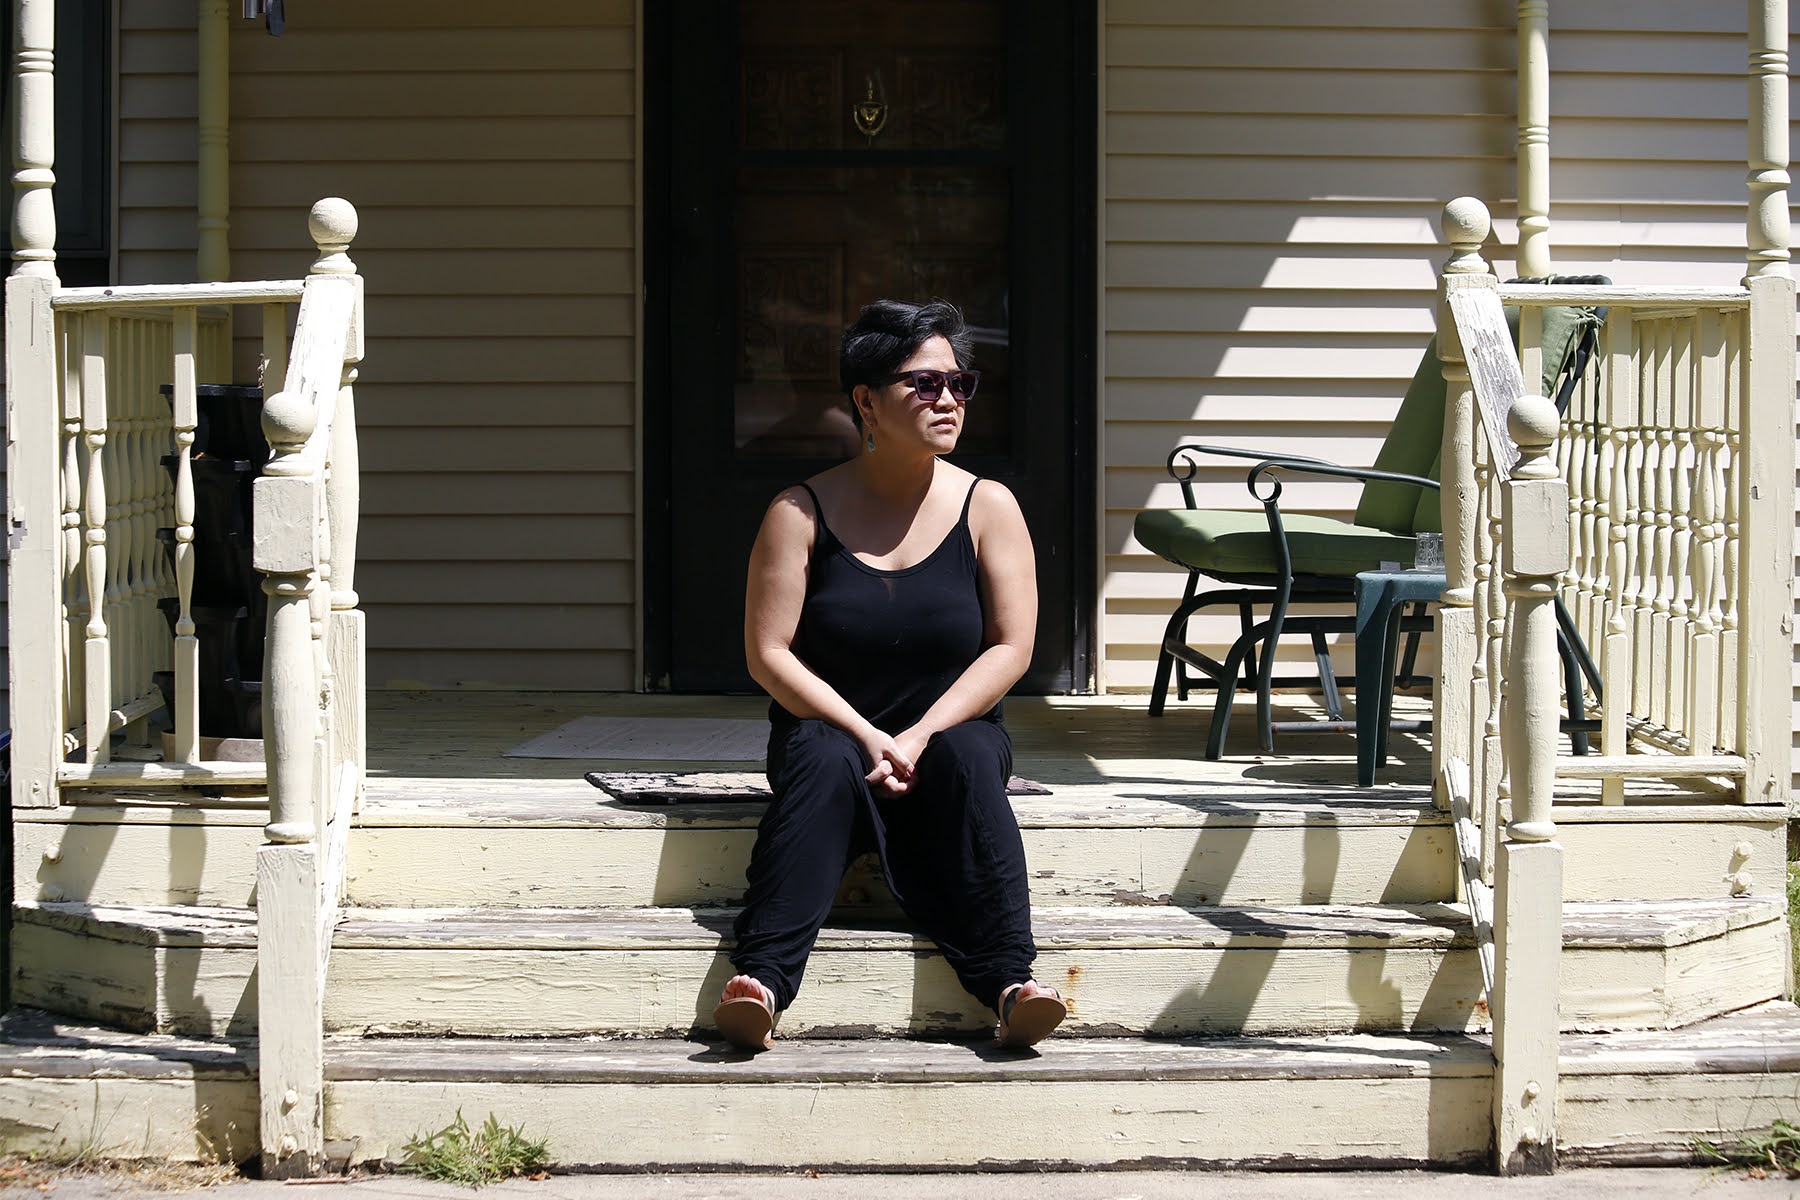 Photograph of Fran Flaherty sitting on the steps leading up to her home.